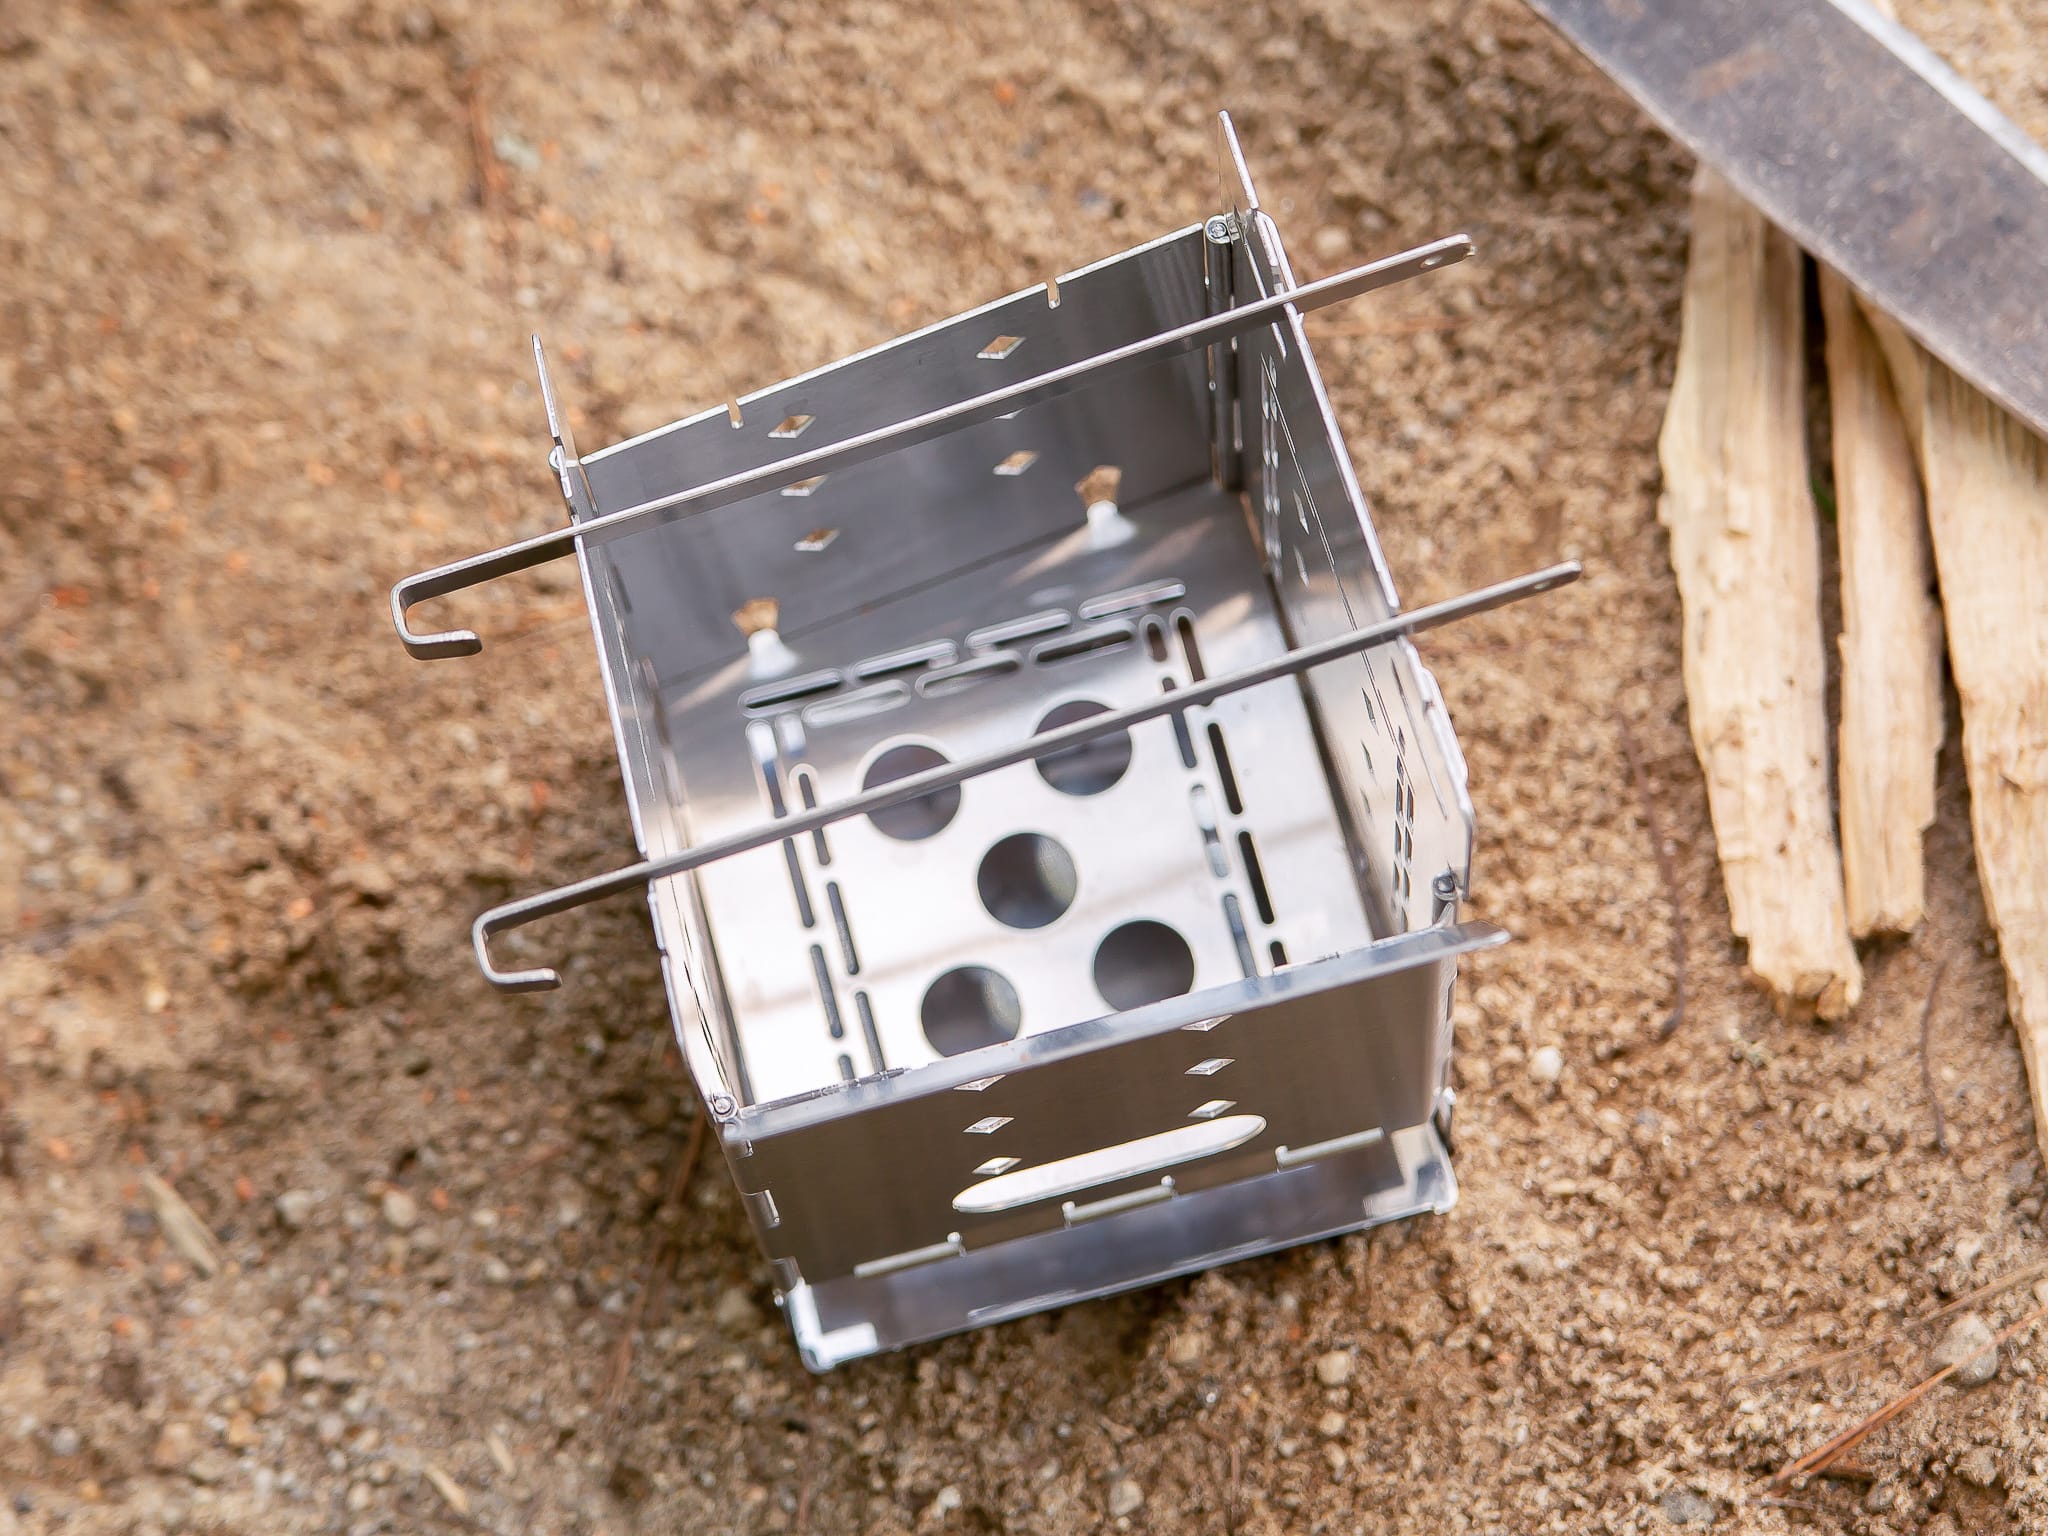 Firebox Stove - 5 Gen2 Large Camp Stove - Fiddleback Outpost